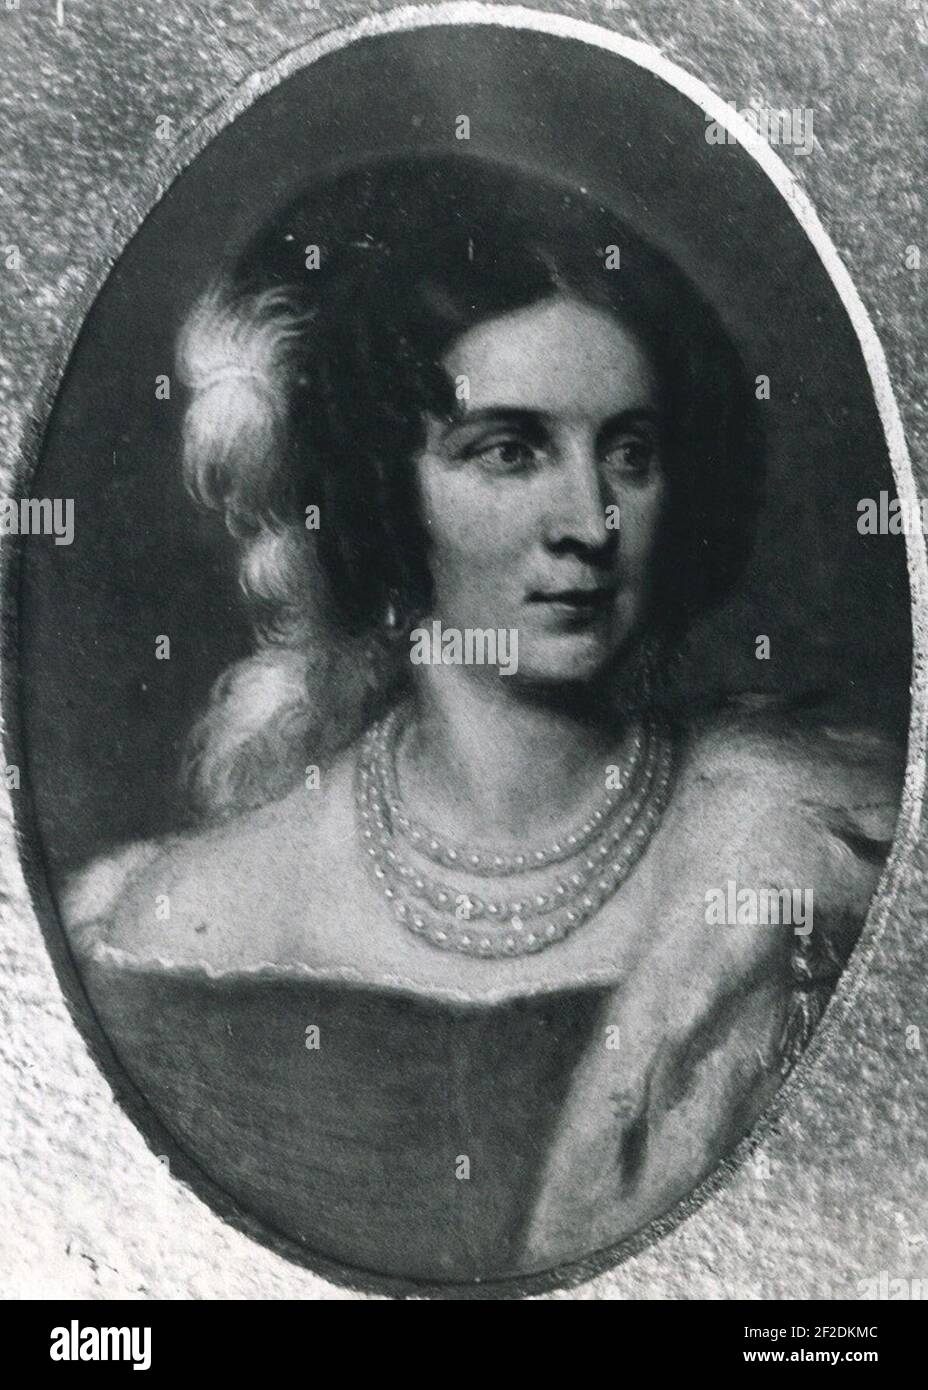 Portrait of Theresa of Saxe-Hildburghausen, Queen of Bavaria by George Dury. Stock Photo